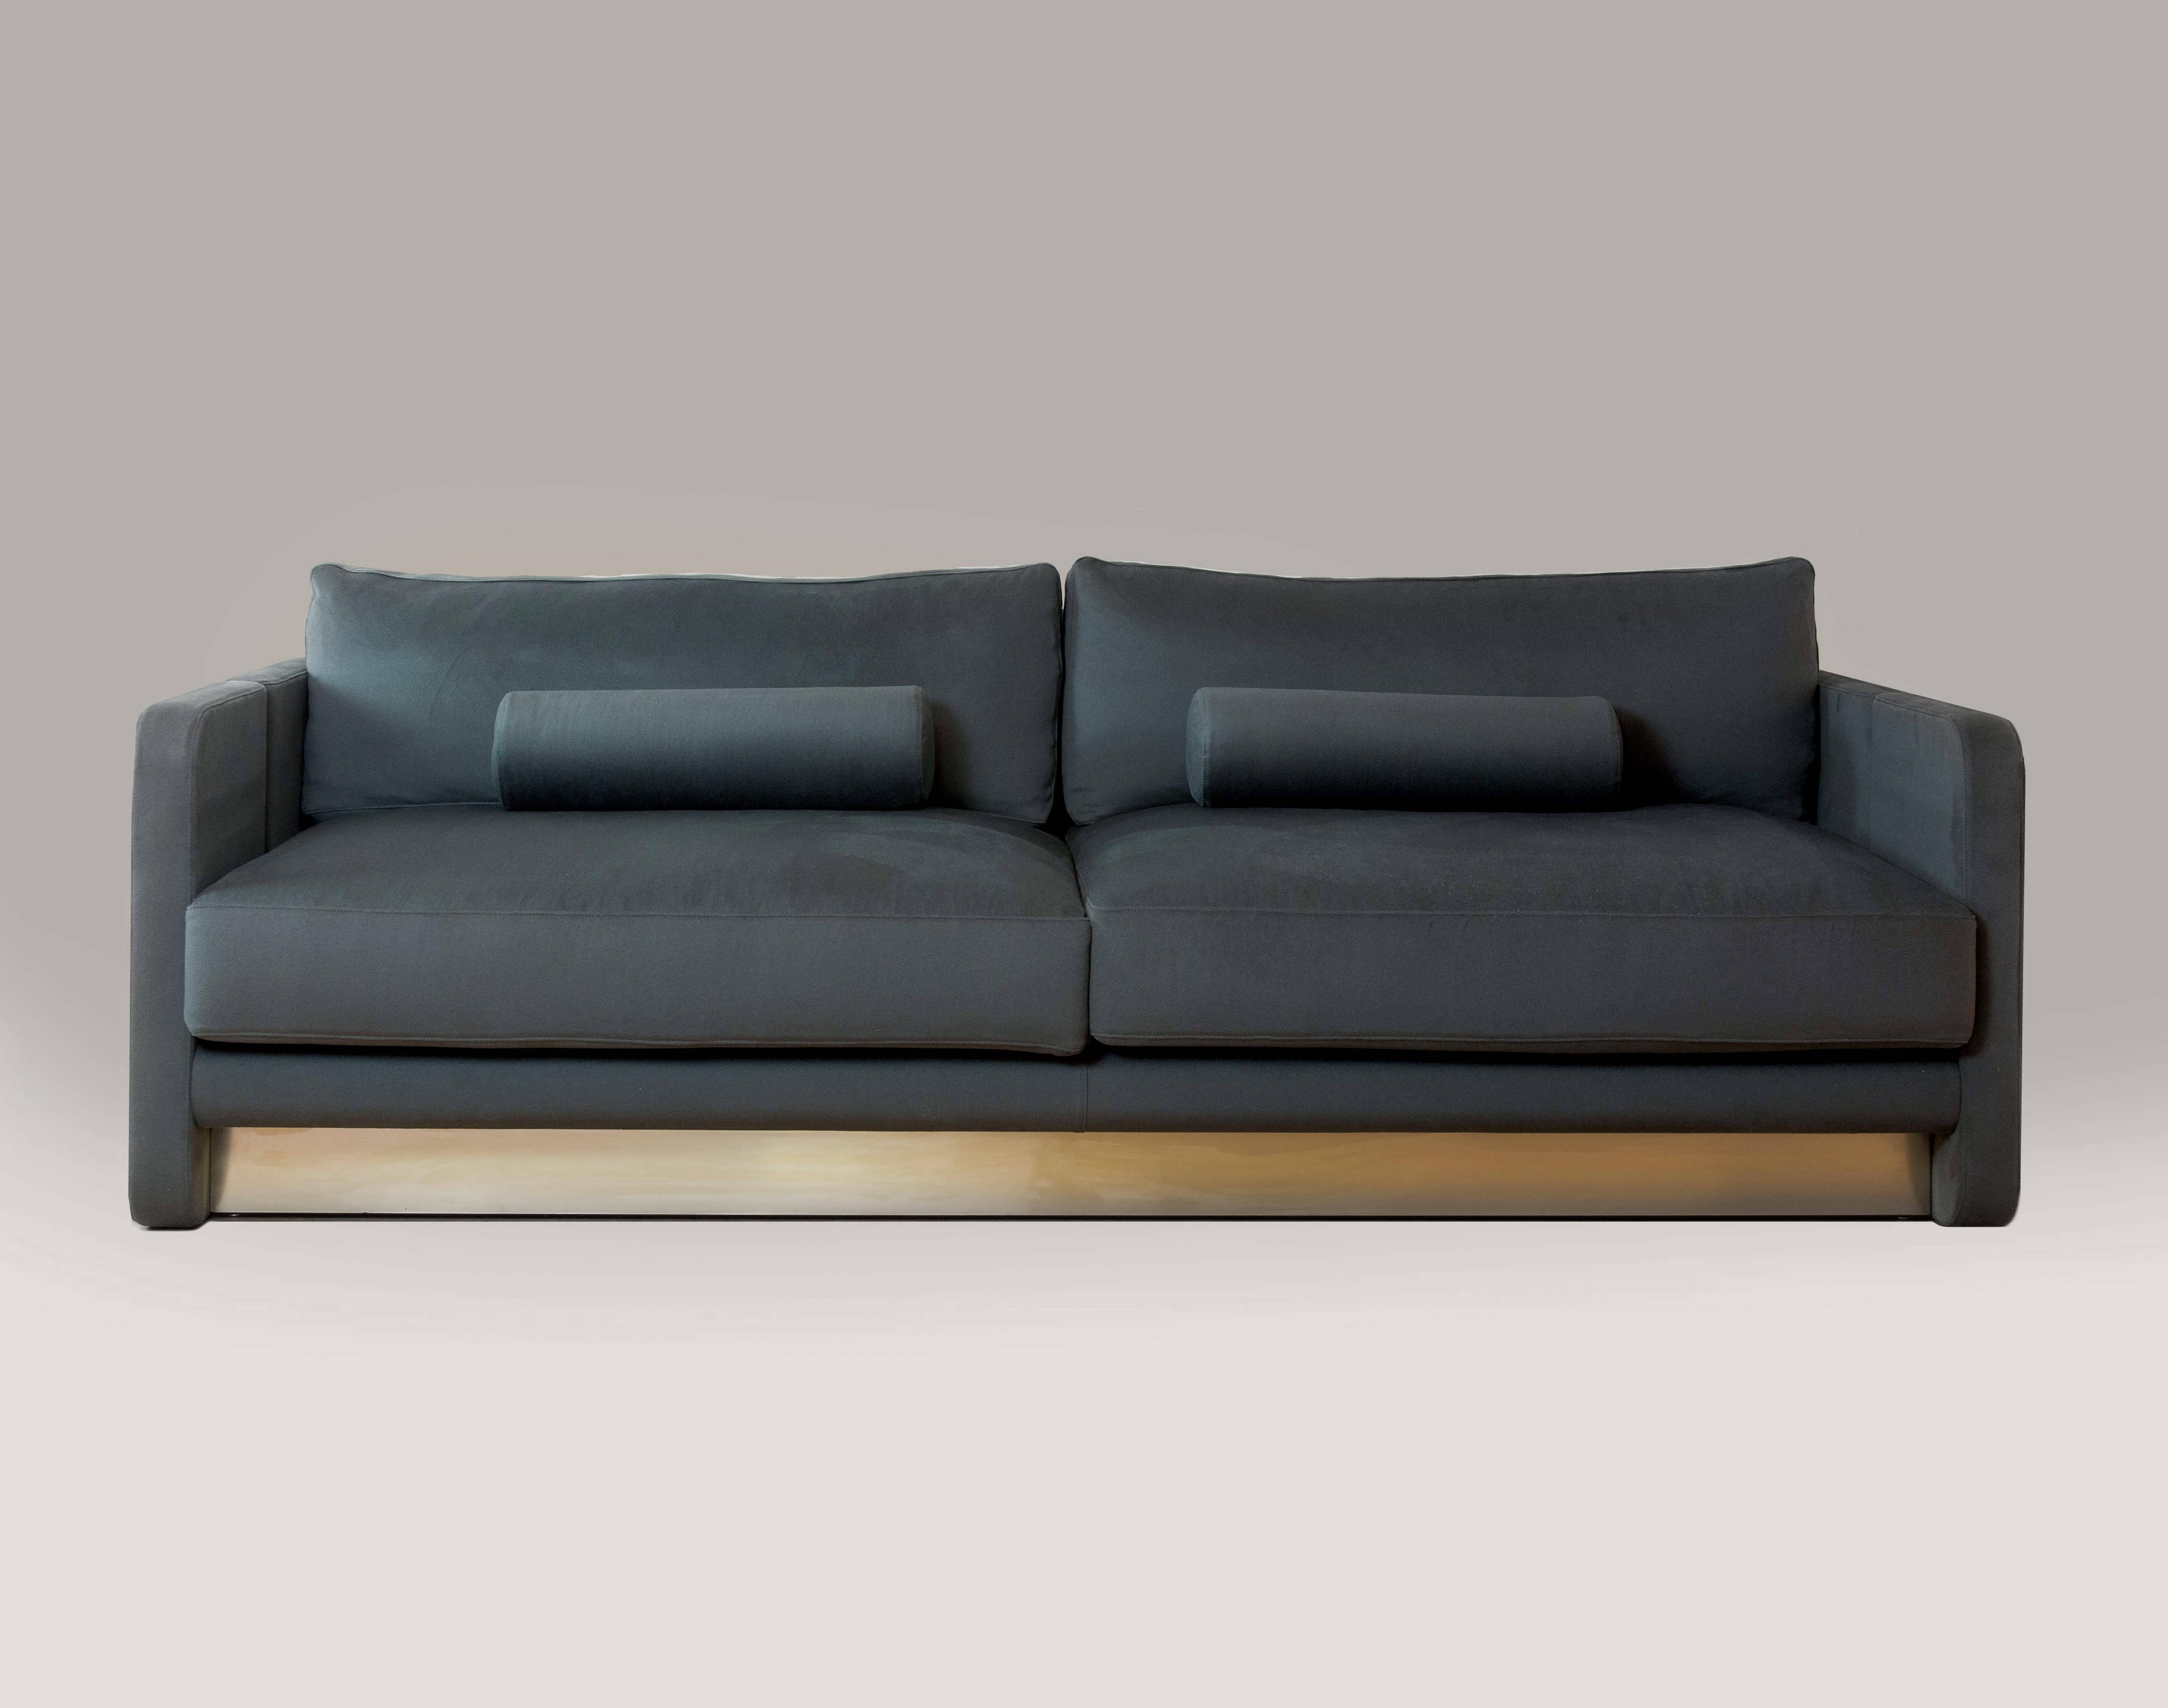 Montenapoleone Sofa by Andrea Bonini
Limited Edition
Dimensions: D 71 x W 220 x H 85 cm.
Materials: Loro Piana fabric and Brass.

Made in Italy. Limited series, numbered and signed pieces. Custom size or finish on request. Different fabrics